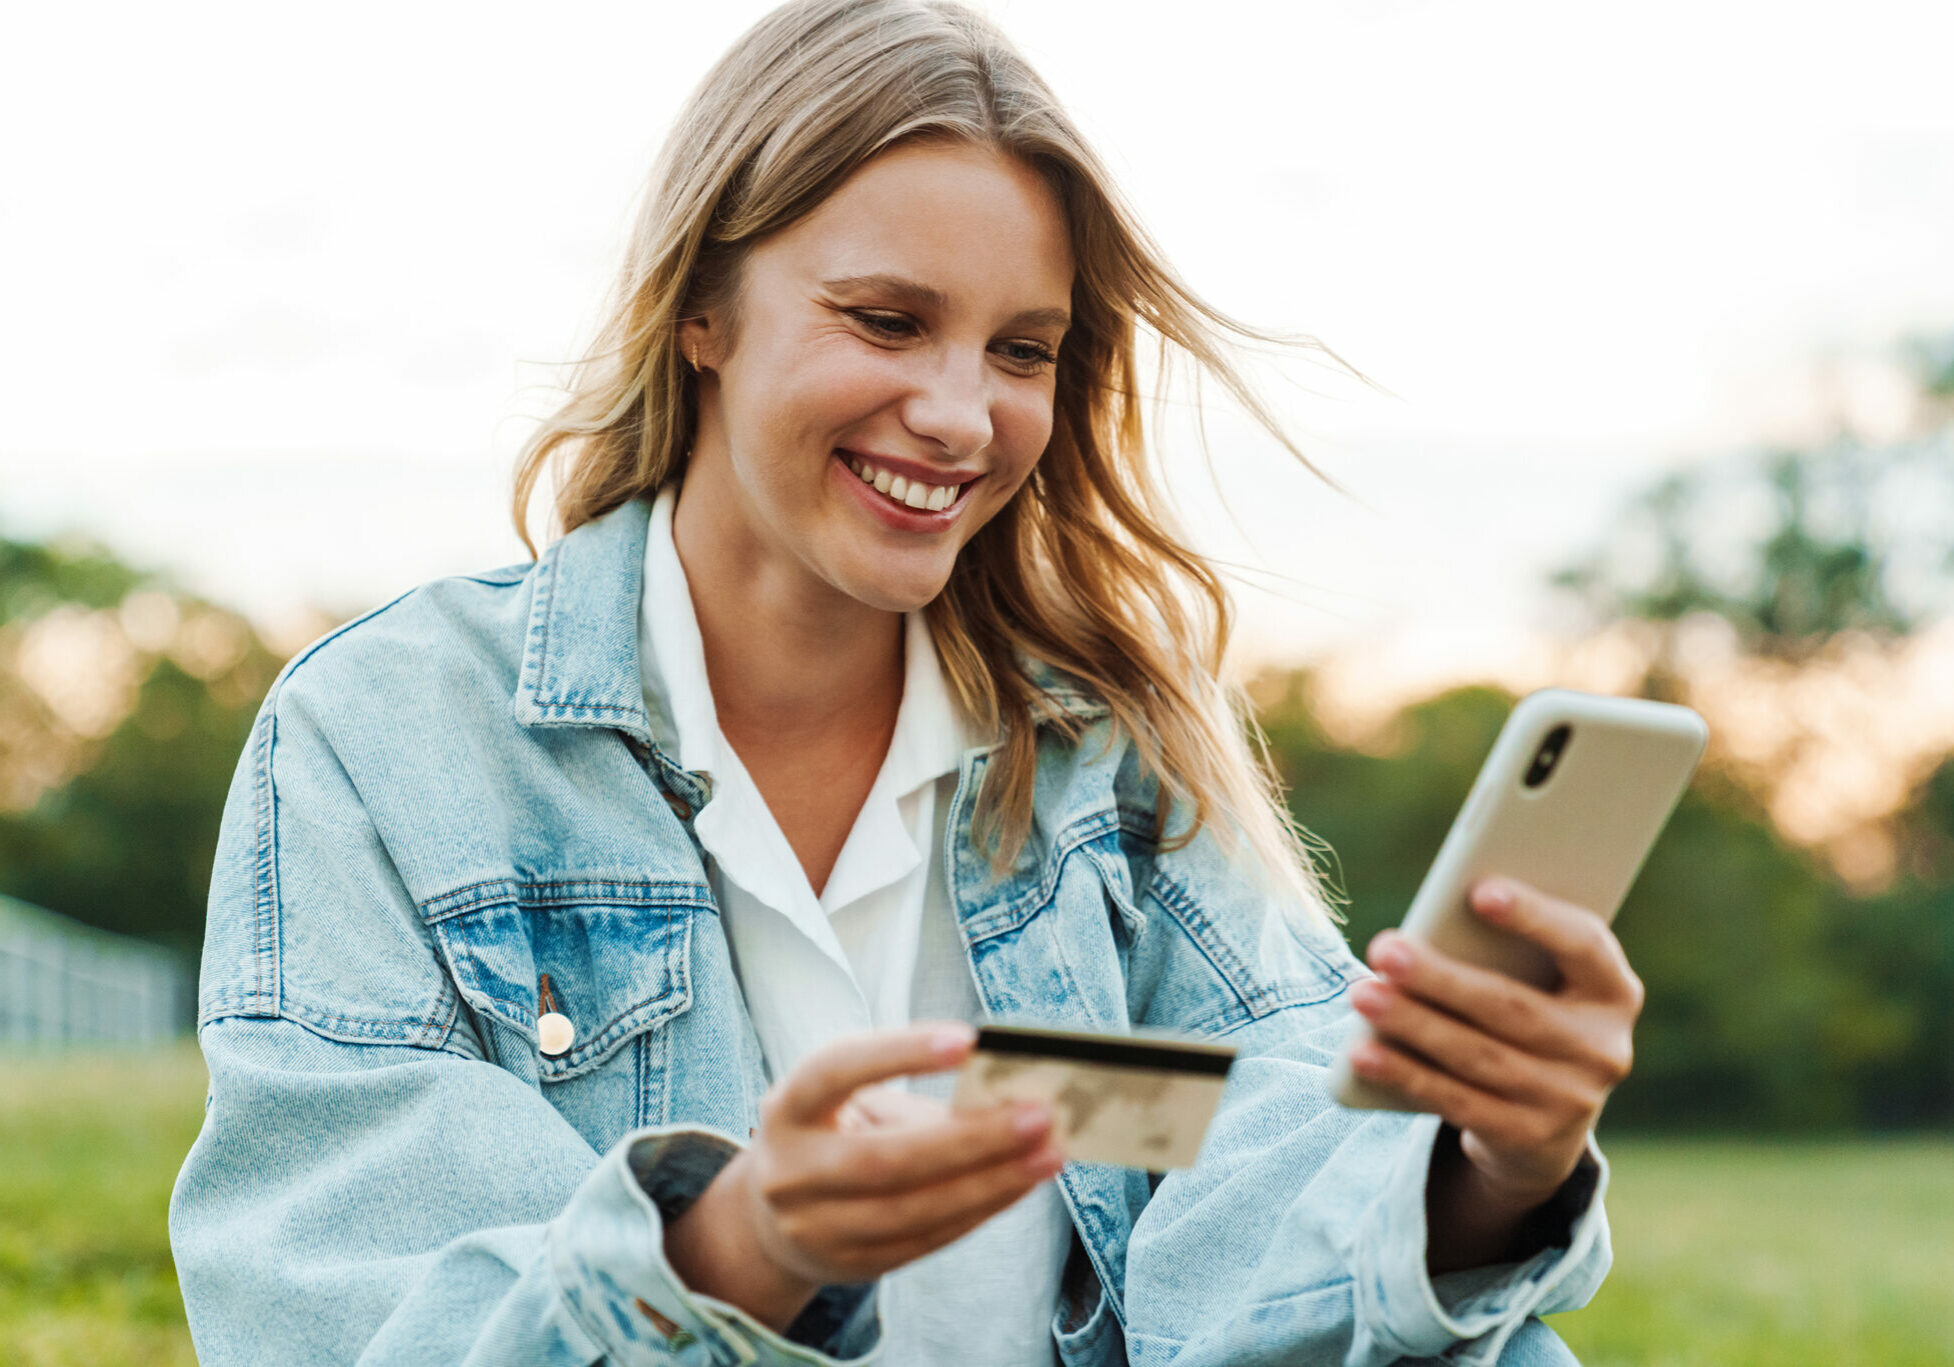 happy-woman-holding-credit-card-and-mobile-phone-w-SAK2JTX